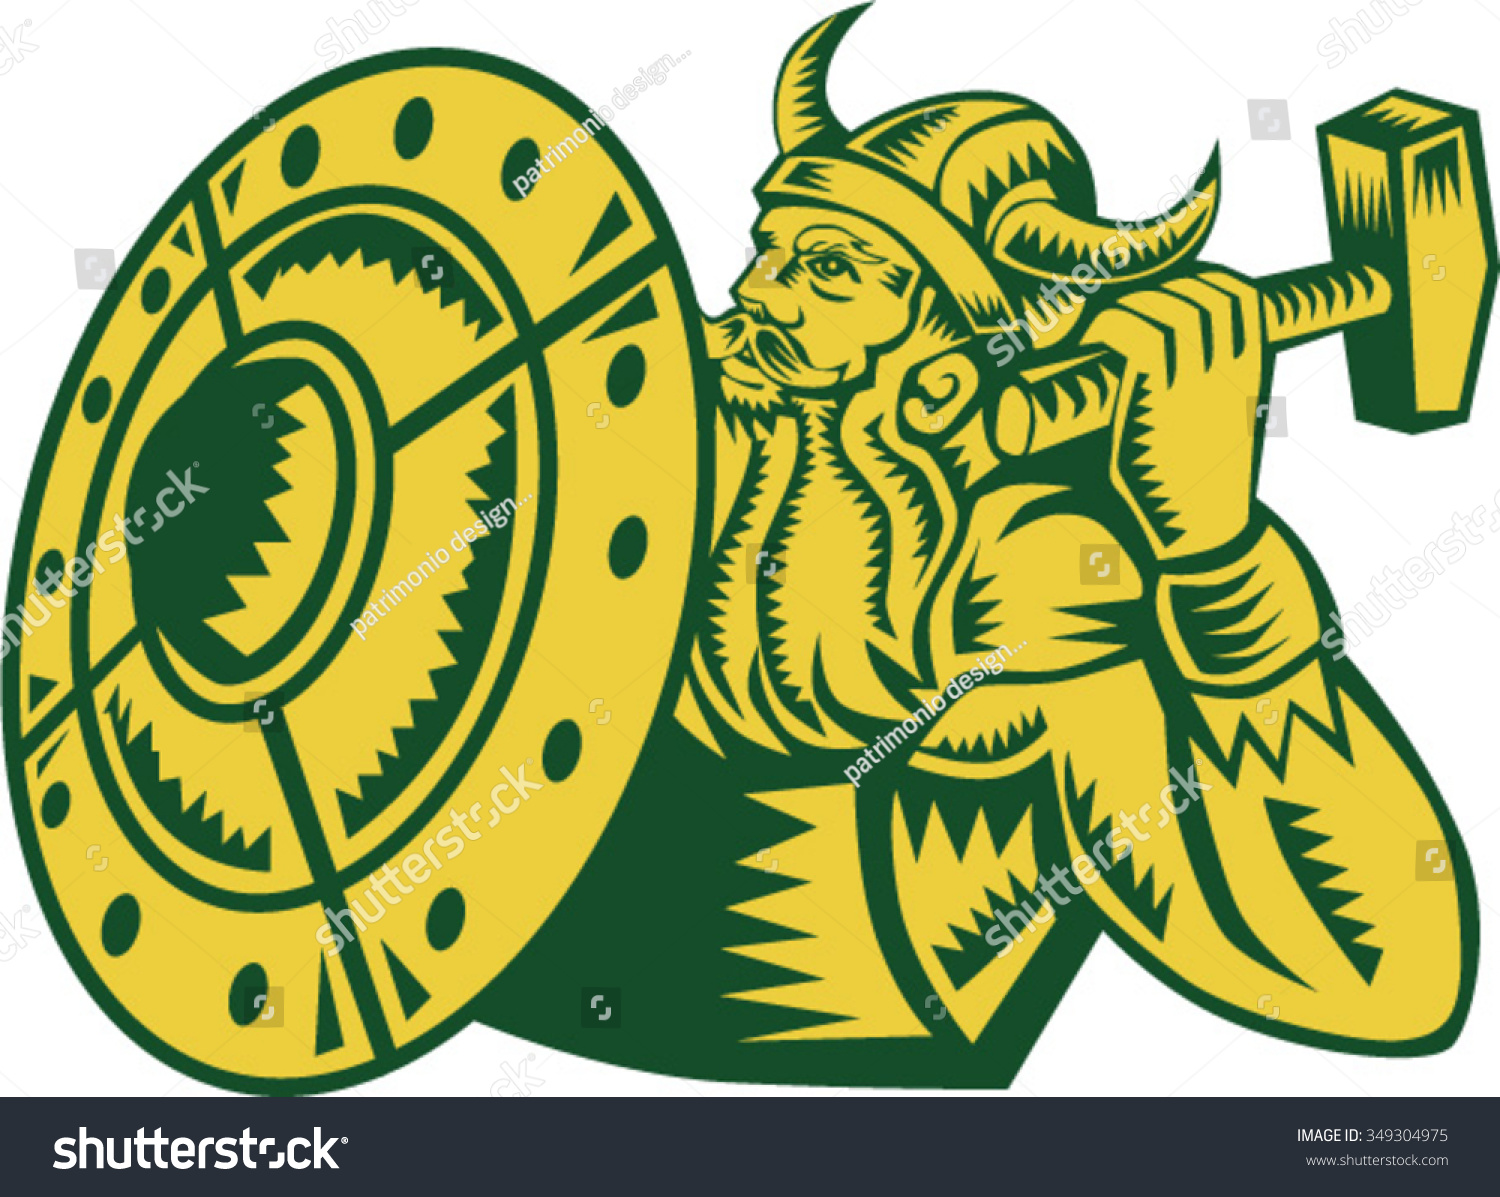 Illustration of a norseman viking warrior raider barbarian wearing horned helmet with beard holding hammer and shield viewed from side set on isolated white background done in retro woodcut style.  #349304975